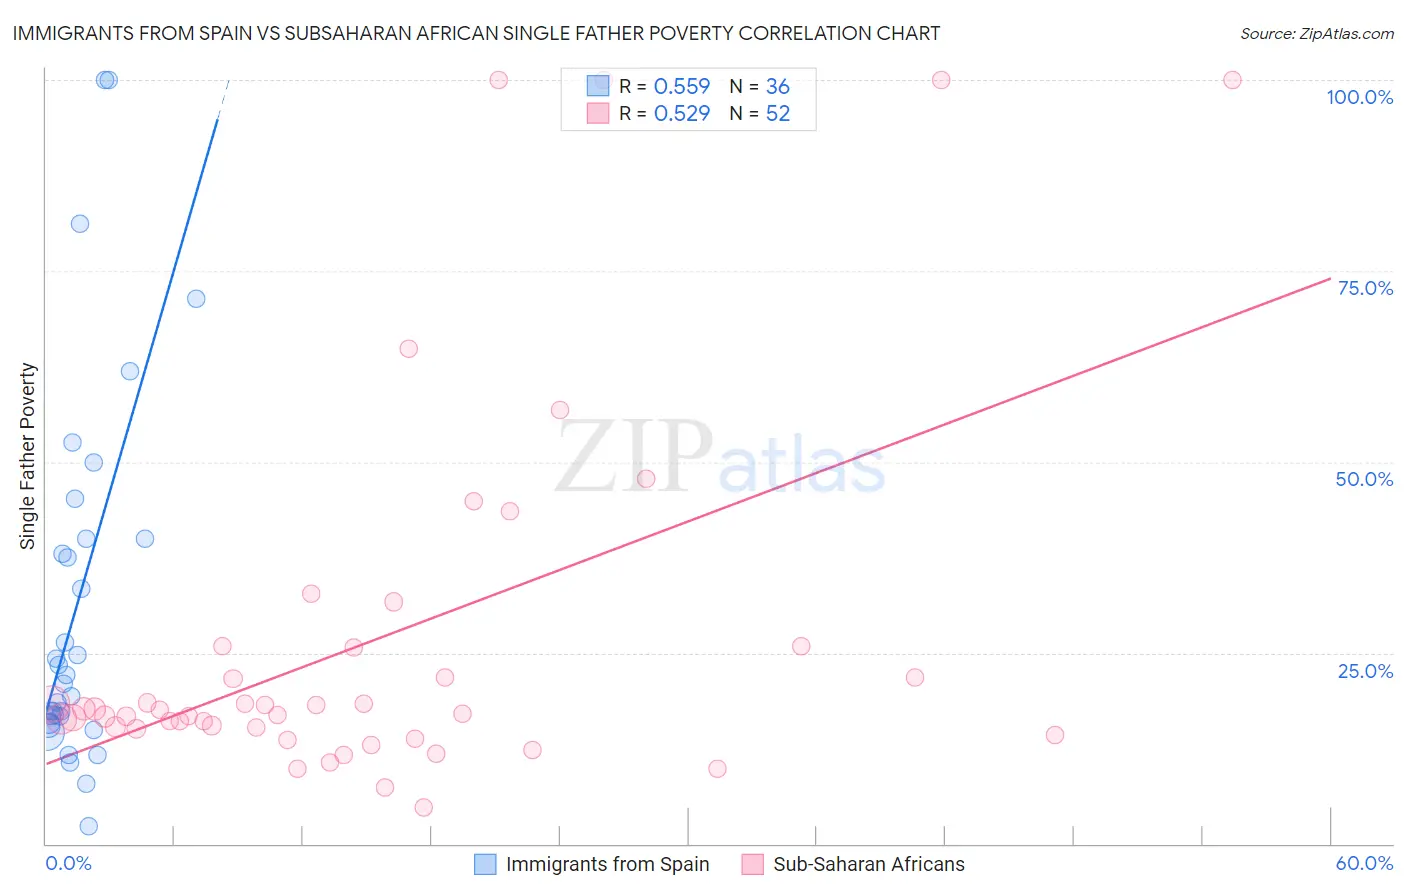 Immigrants from Spain vs Subsaharan African Single Father Poverty